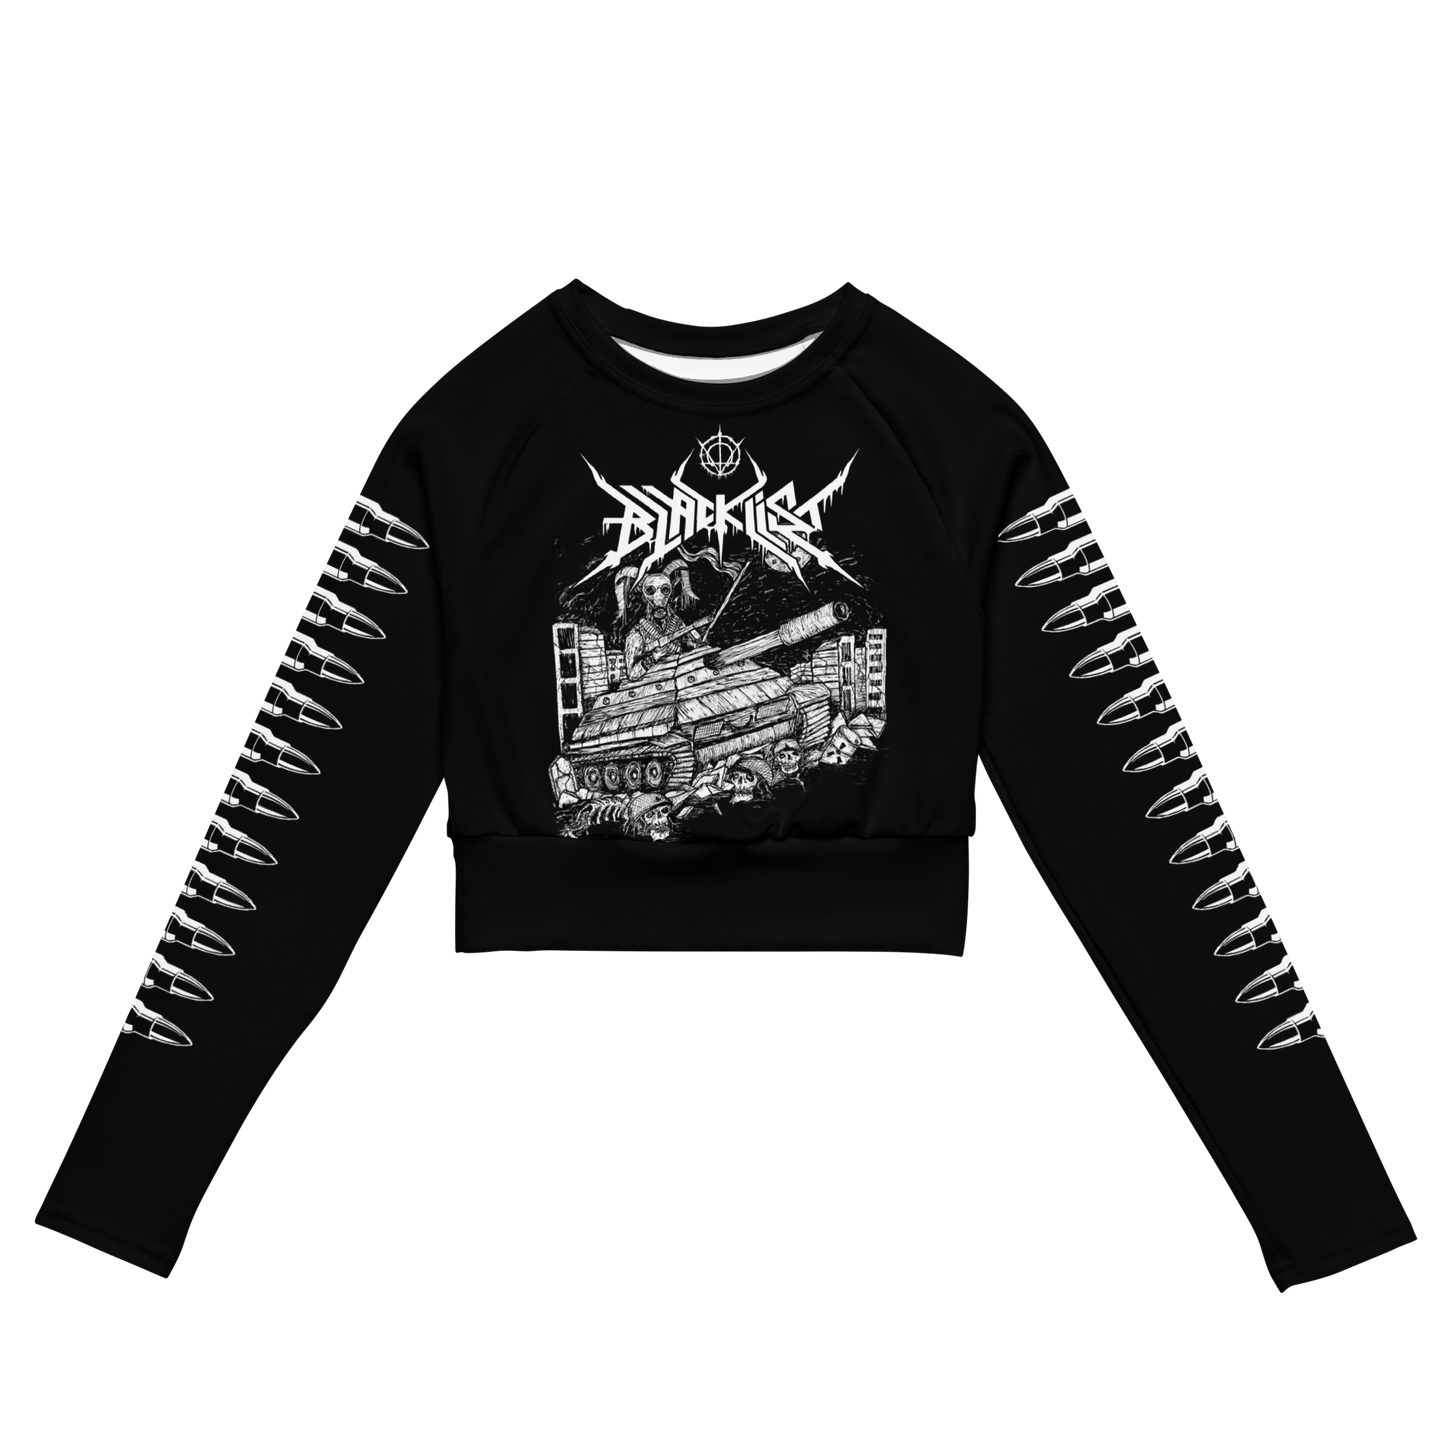 Blacklist (UK) Blood on the Sand official long sleeve crop top by Metal Mistress